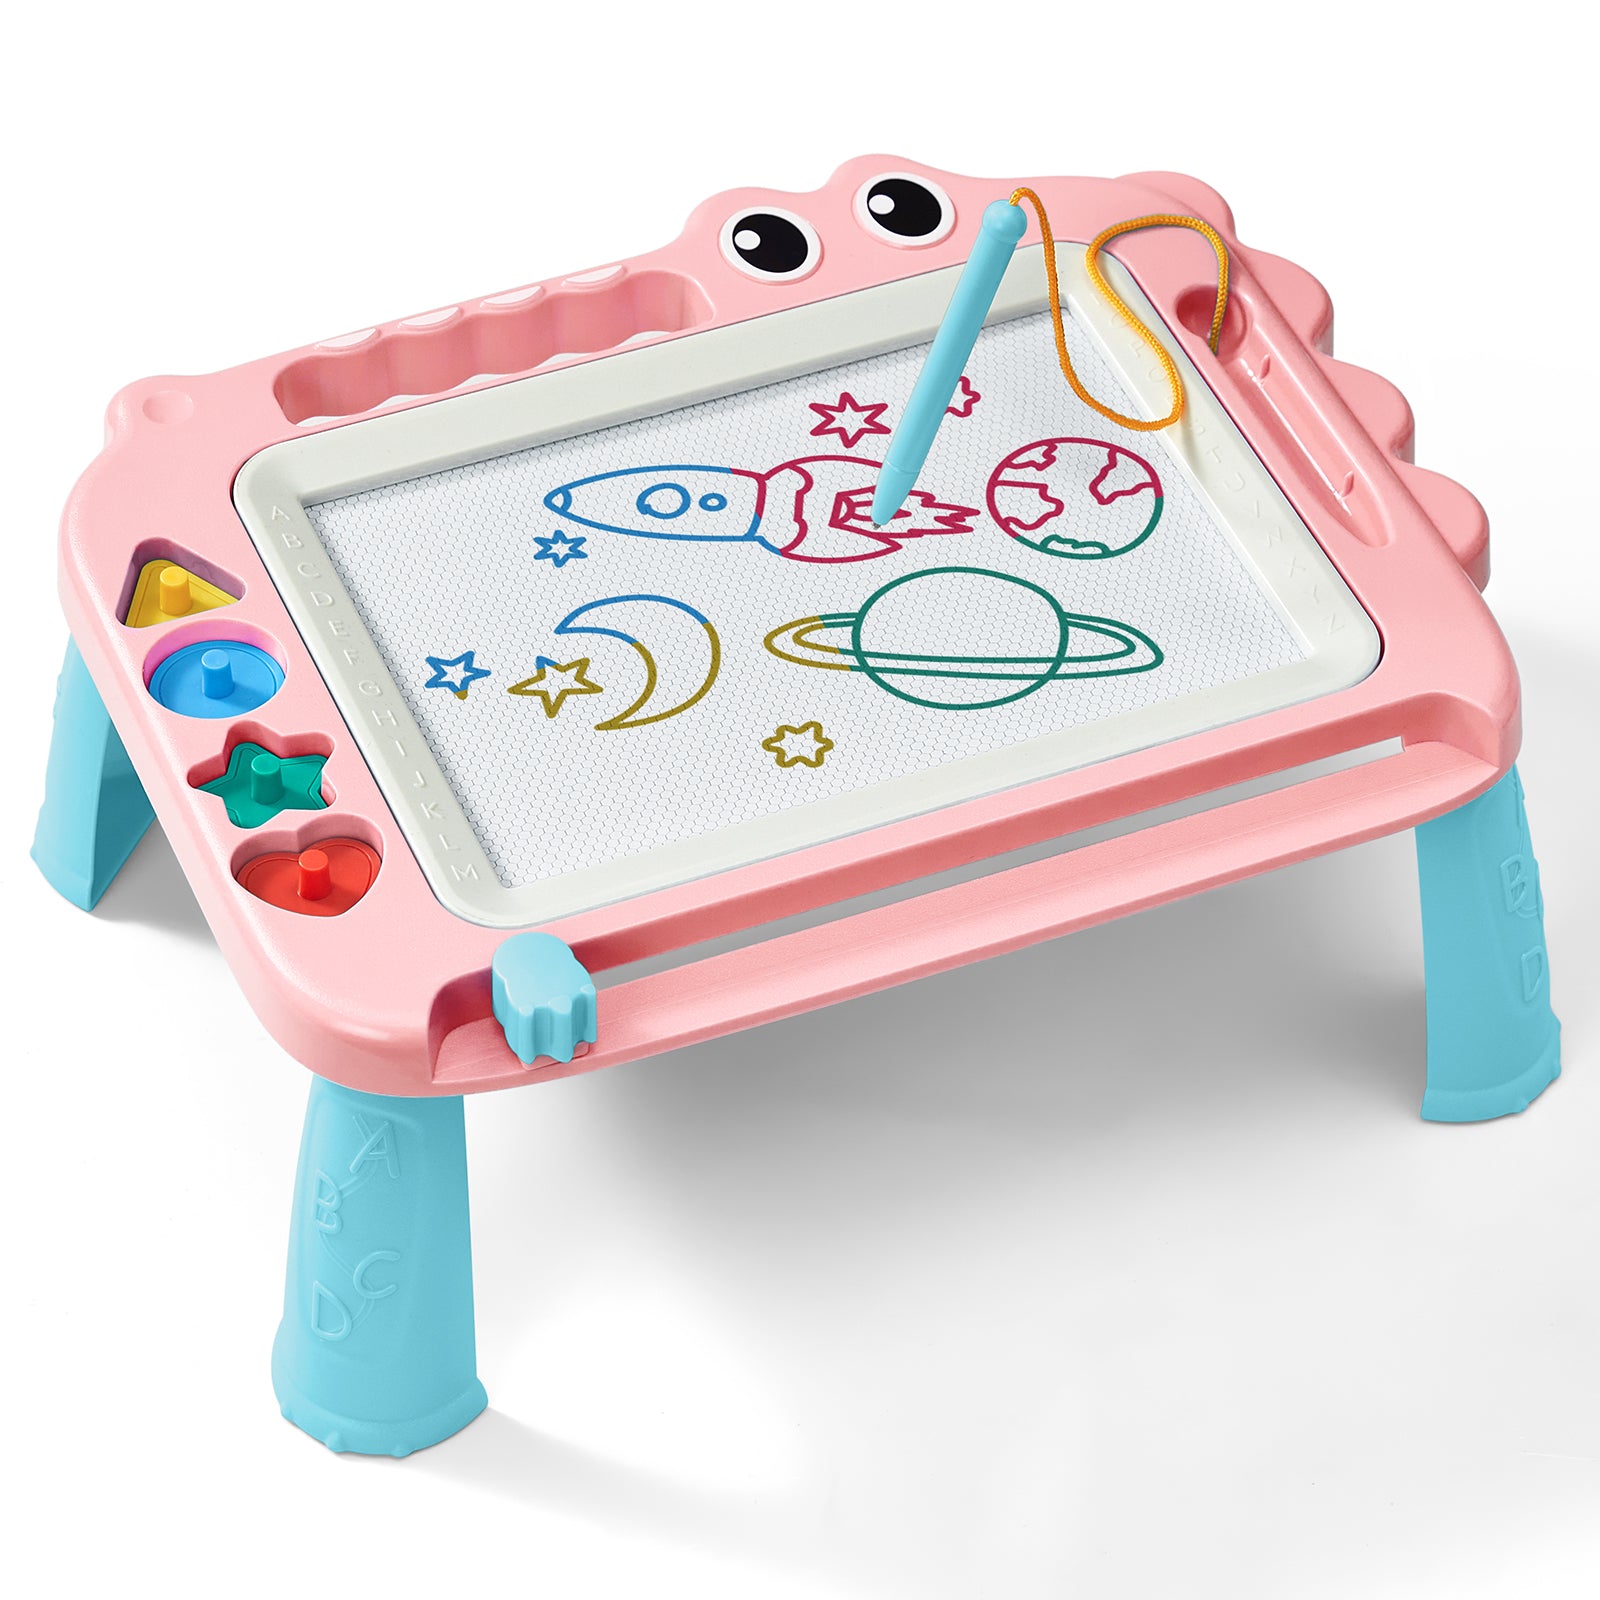 SGILE Magnetic Drawing Board with Legs – sgile